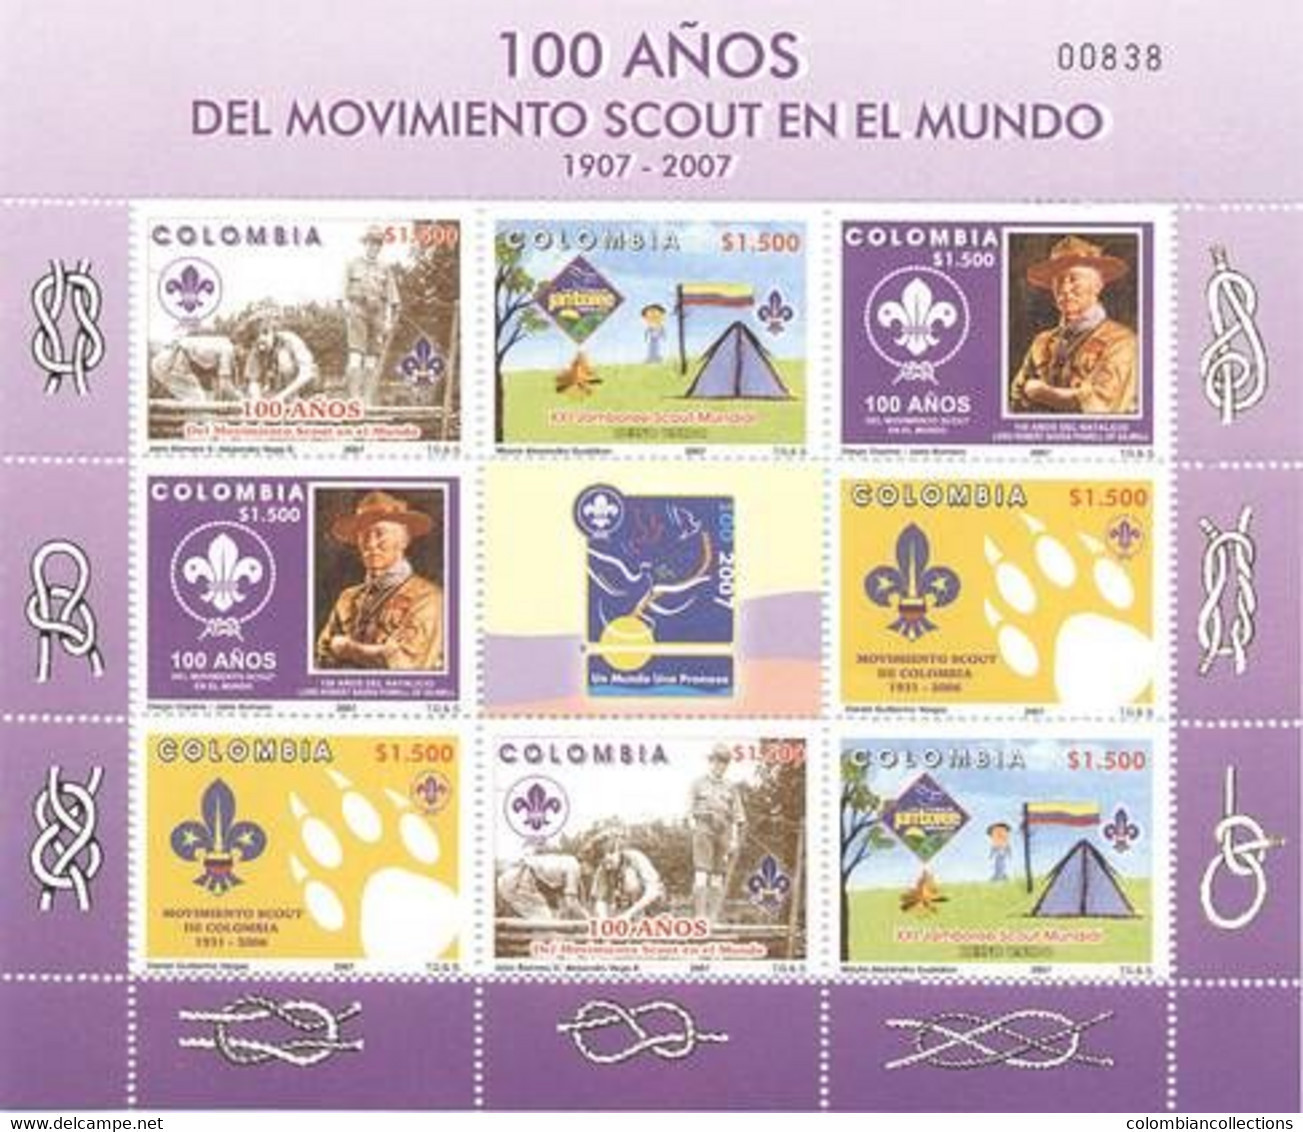 Lote 54b, Colombia, 2007, Pliego, Sheet, 100 Años Scout, 100 Year, Robert Baden Powell - Colombia